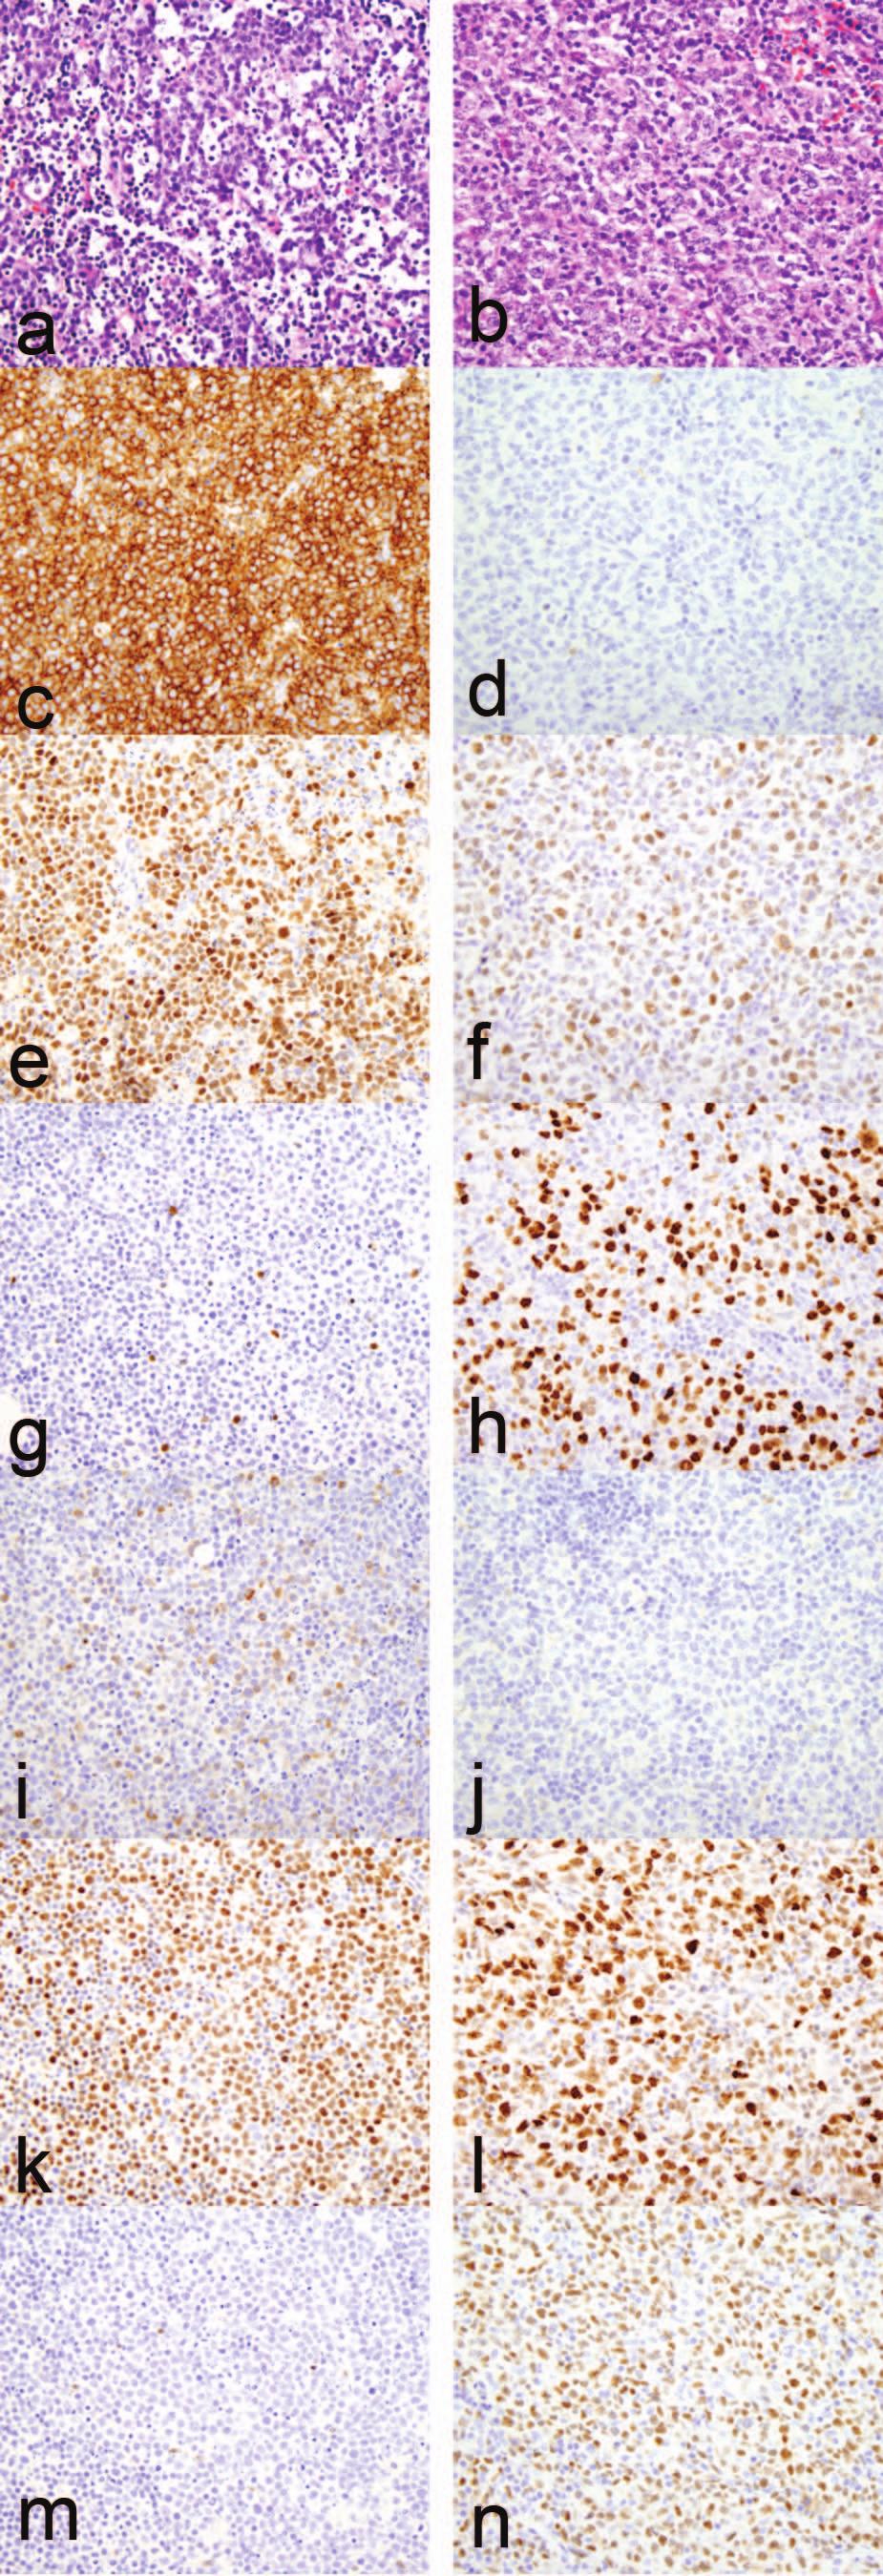 Plasmablastic Lymphoma Plasmablastic lymphoma is an aggressive B-cell neoplasm, which has immunophenotypic features of plasma cells with large cell morphology, and varying degrees of associated, more